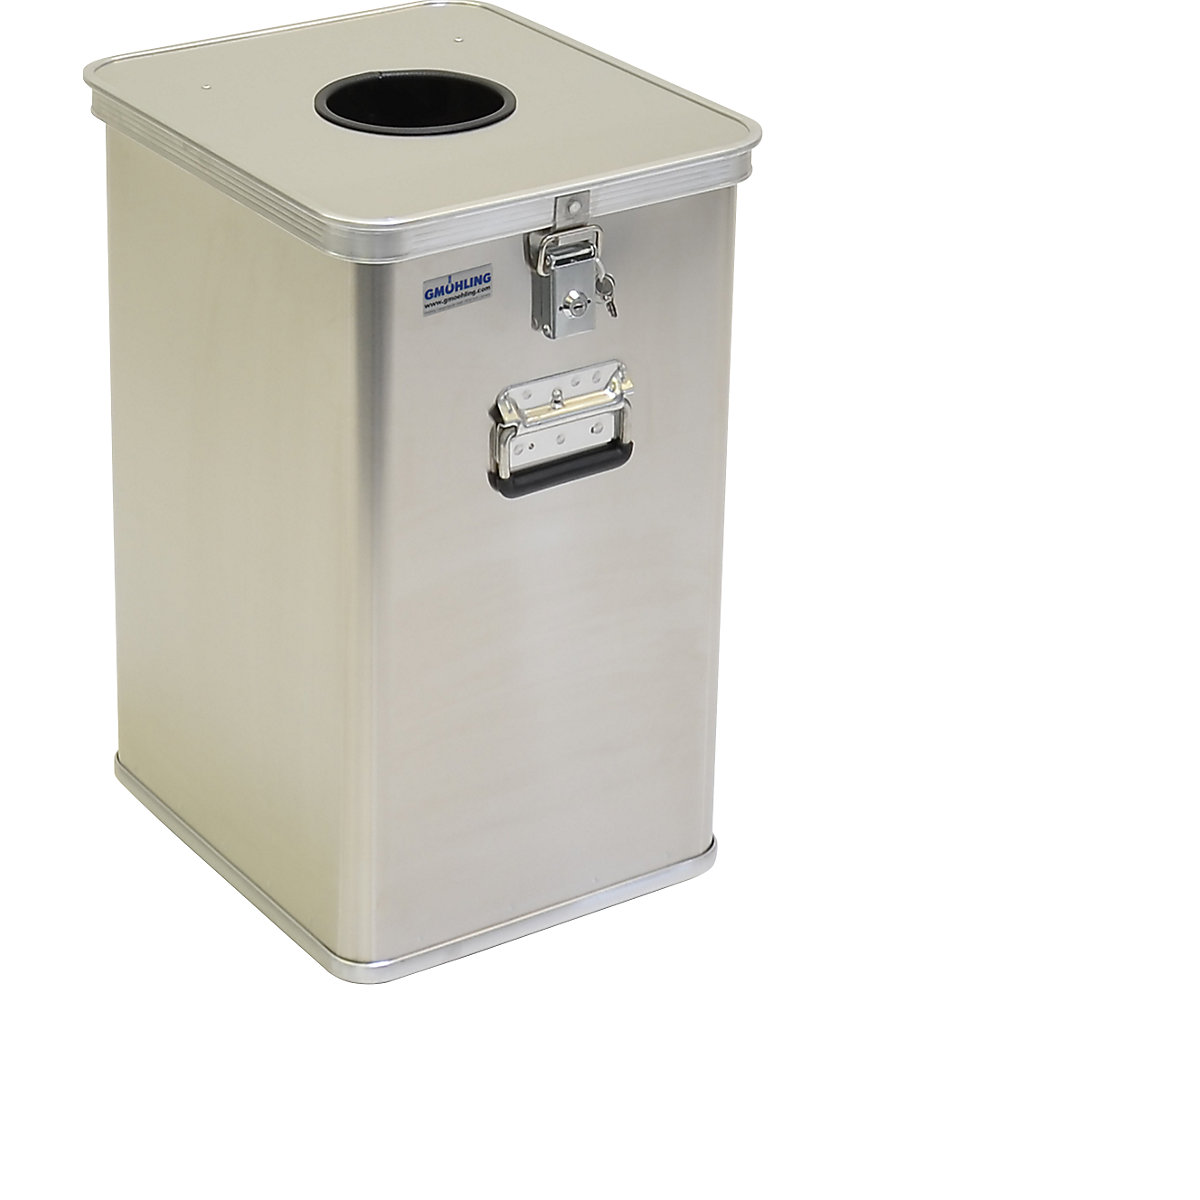 G®-DROP safety disposal can – Gmöhling